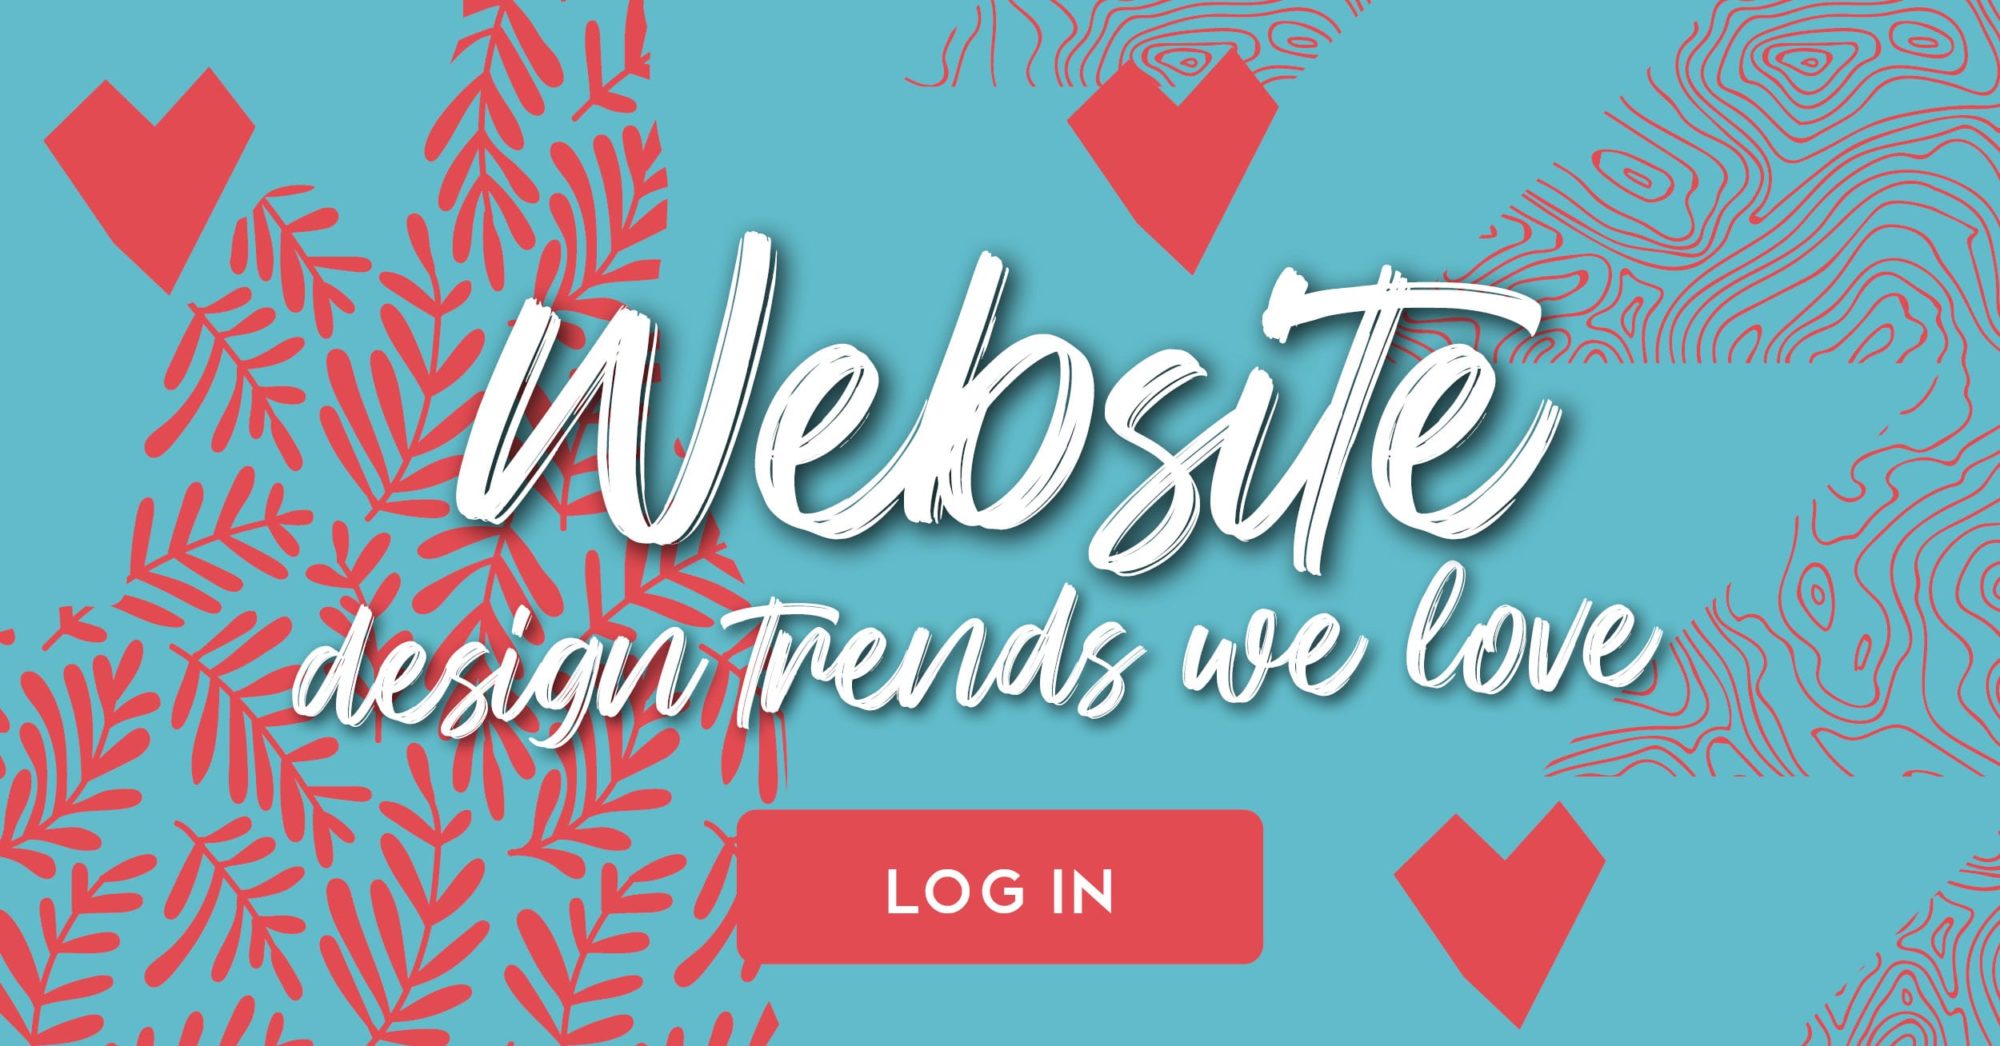 Teal background with red hearts and a "Log In" website button and a text overlay, "Website design trends we love."